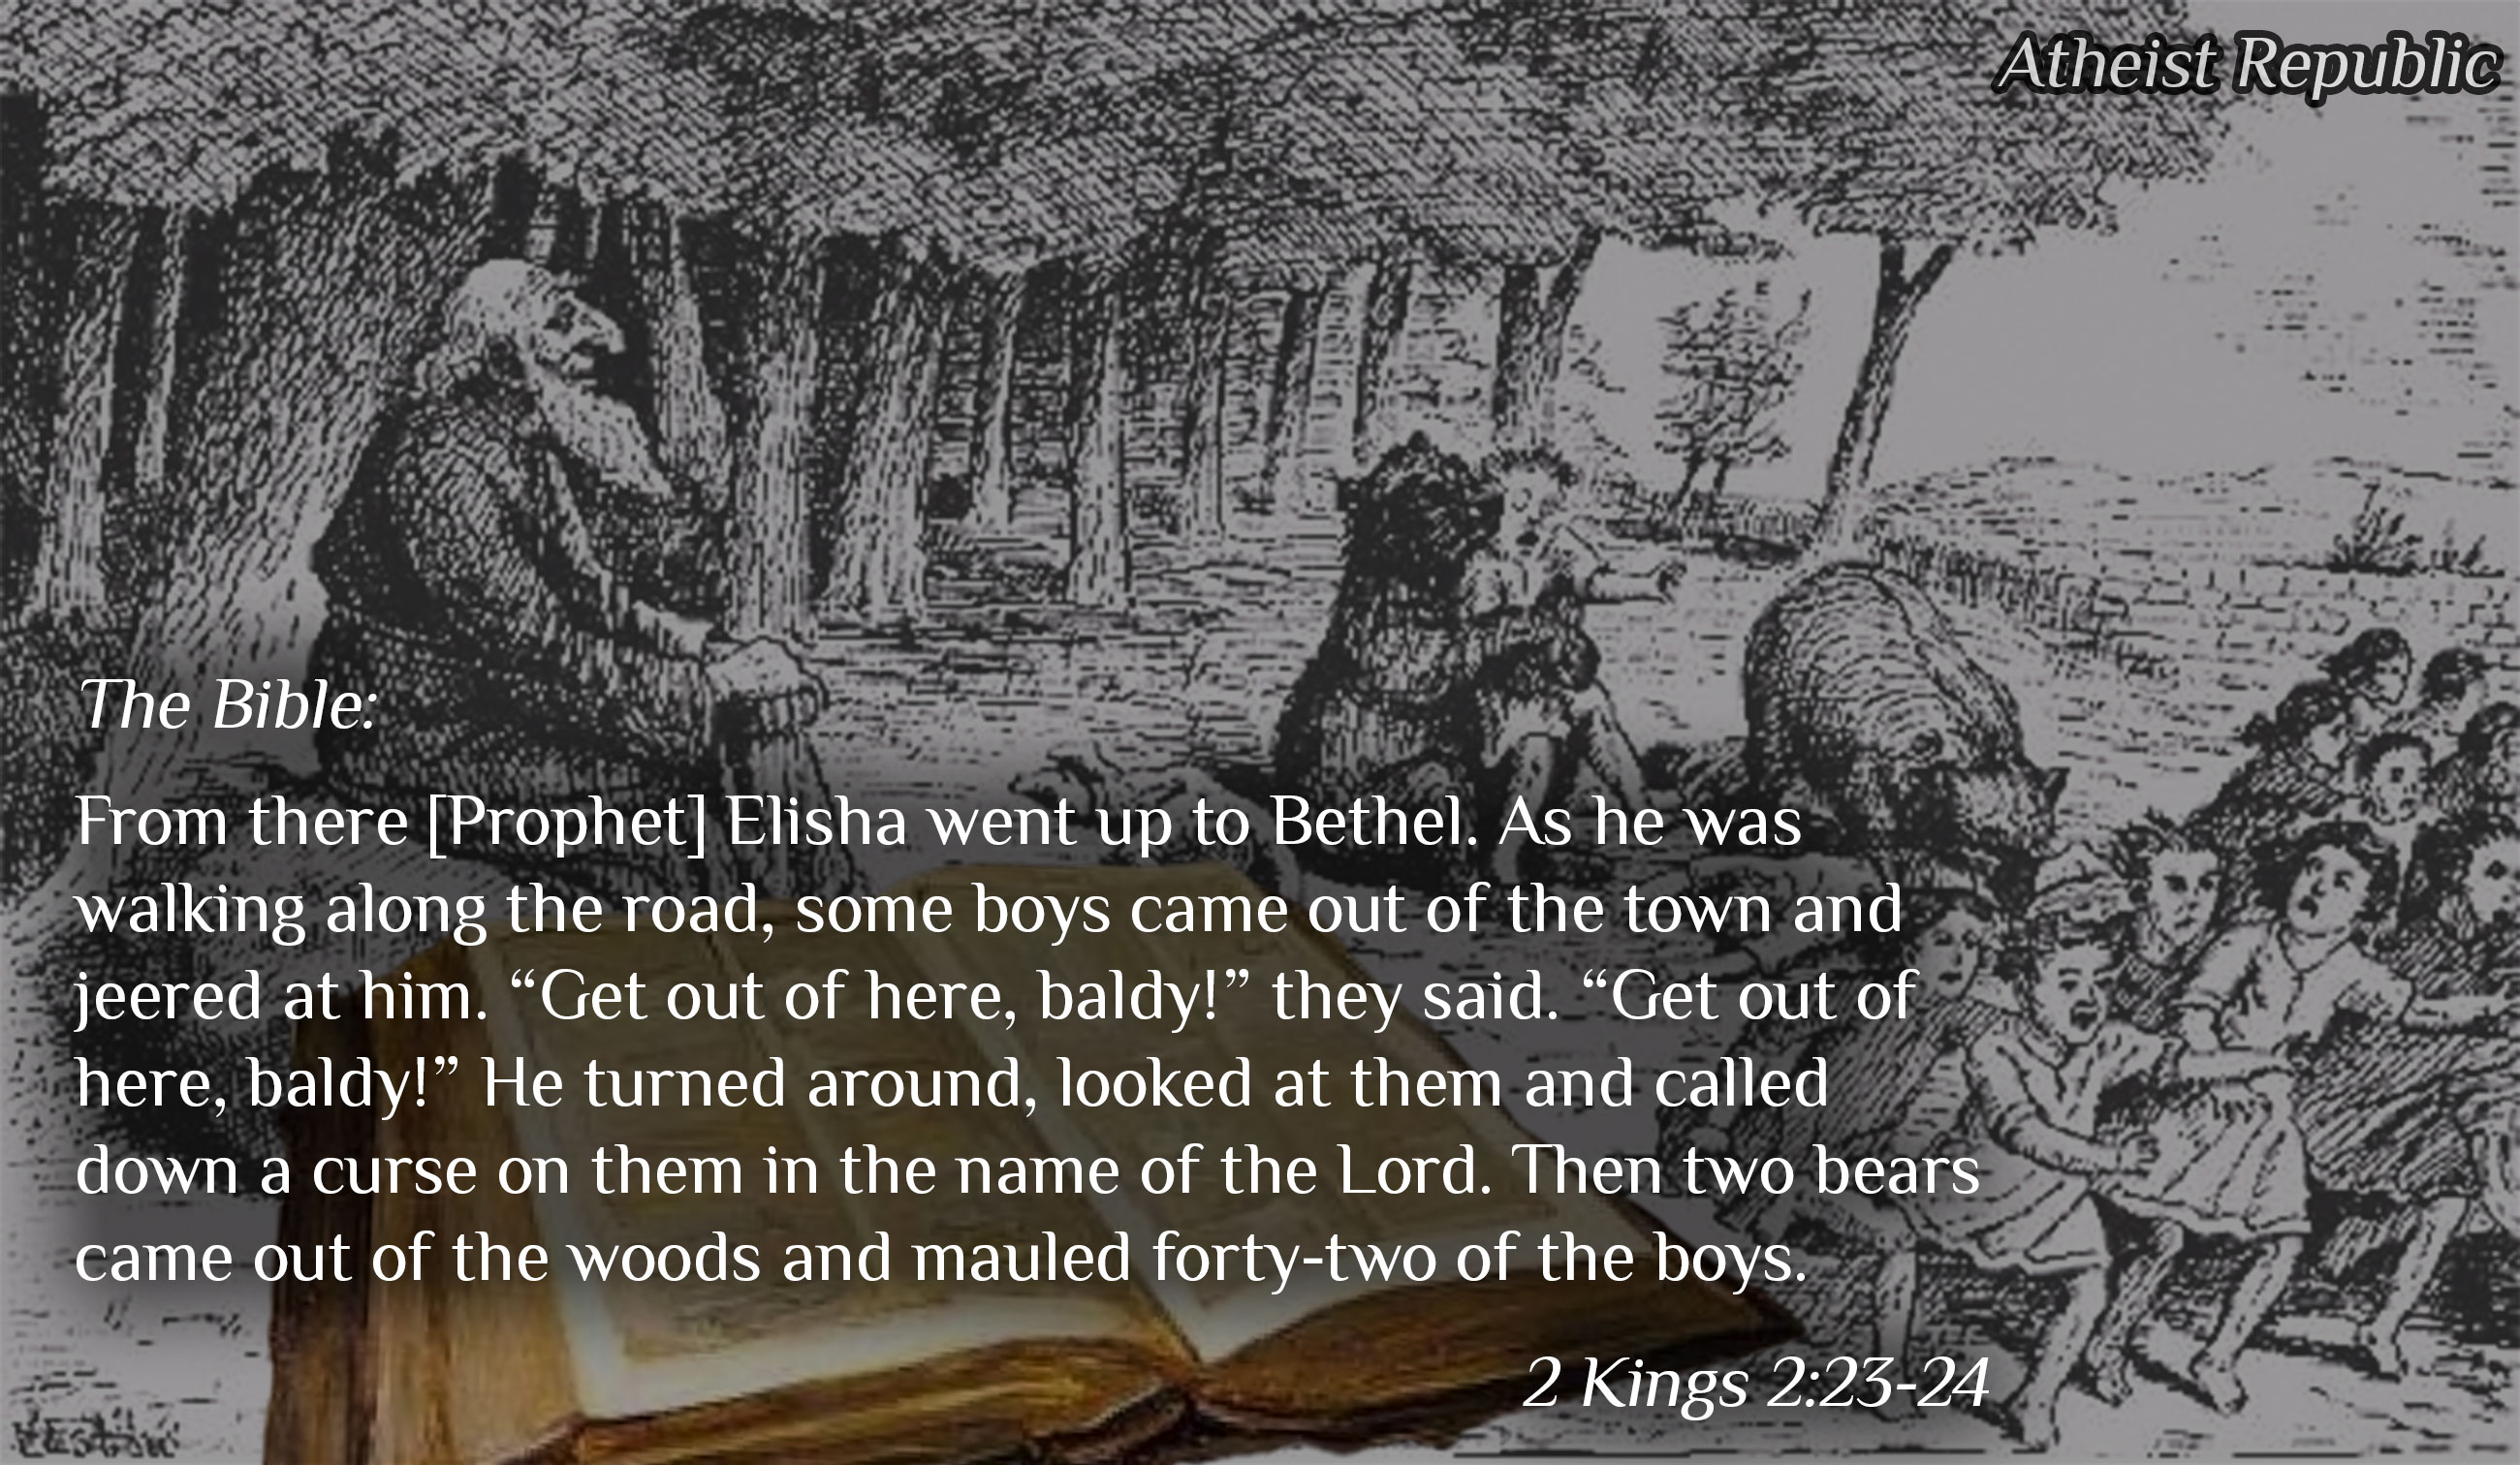 God sends bears to rip up 42 children – The Bible (2 Kings 2:23-24)